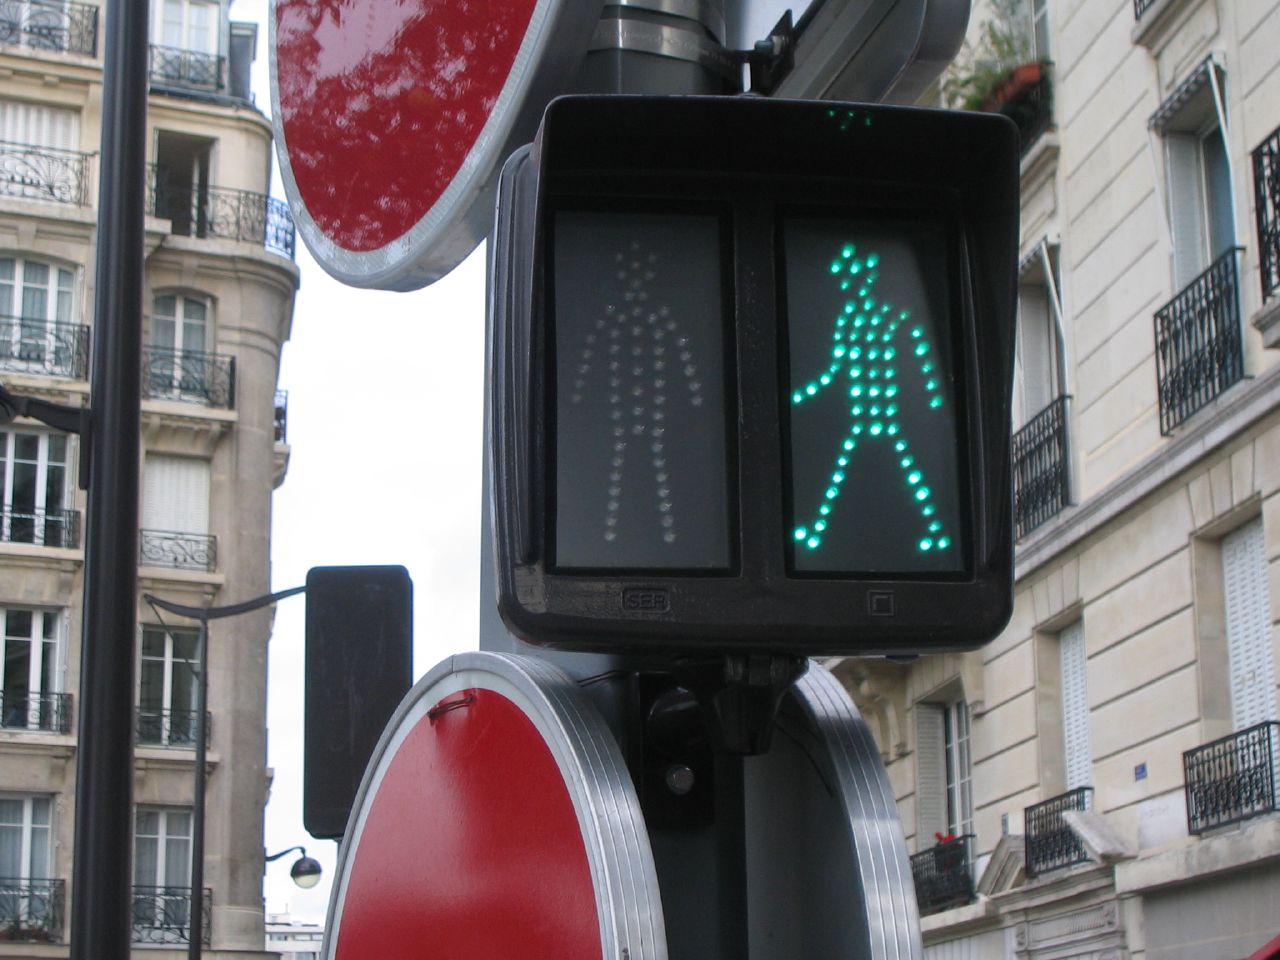 this sign indicates people to walk in an area where you can enter a pedestrian crossing zone